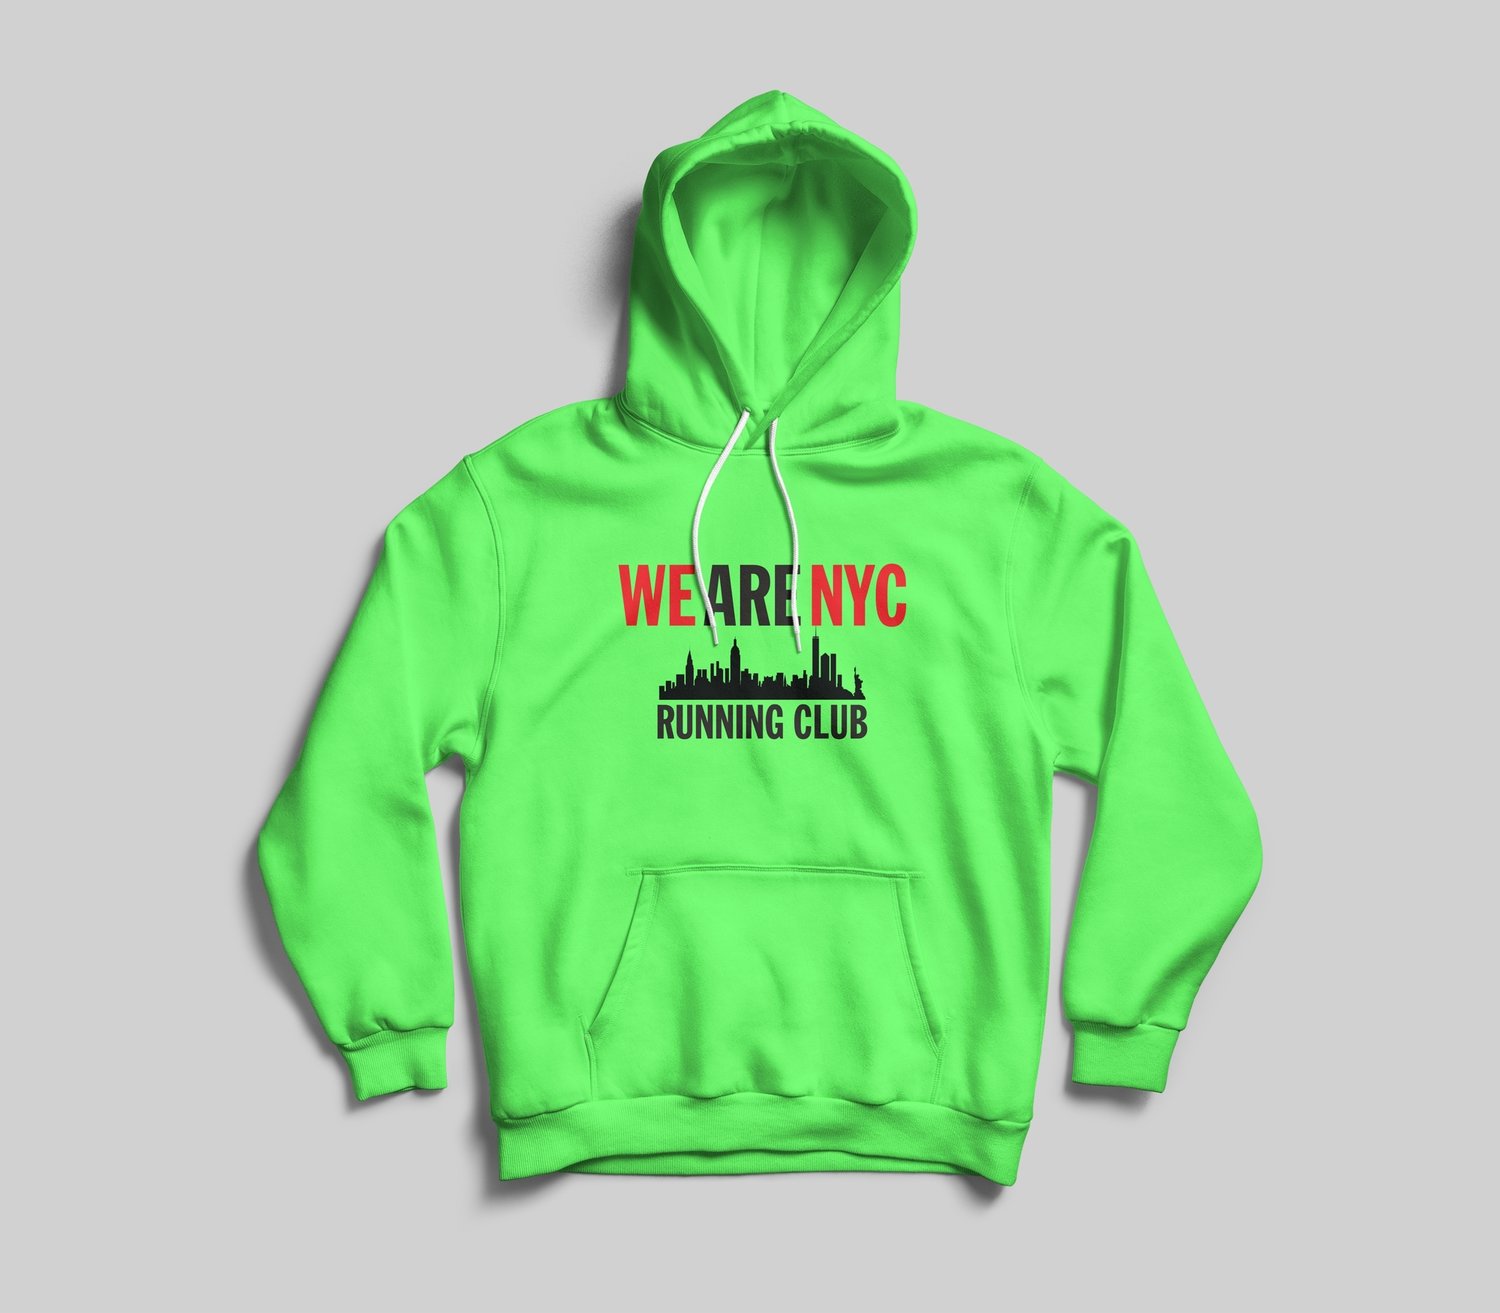 WE ARE NYC IMPACT LOGO HOODED SWEATSHIRT - AVAILABLE IN 7 COLORS!